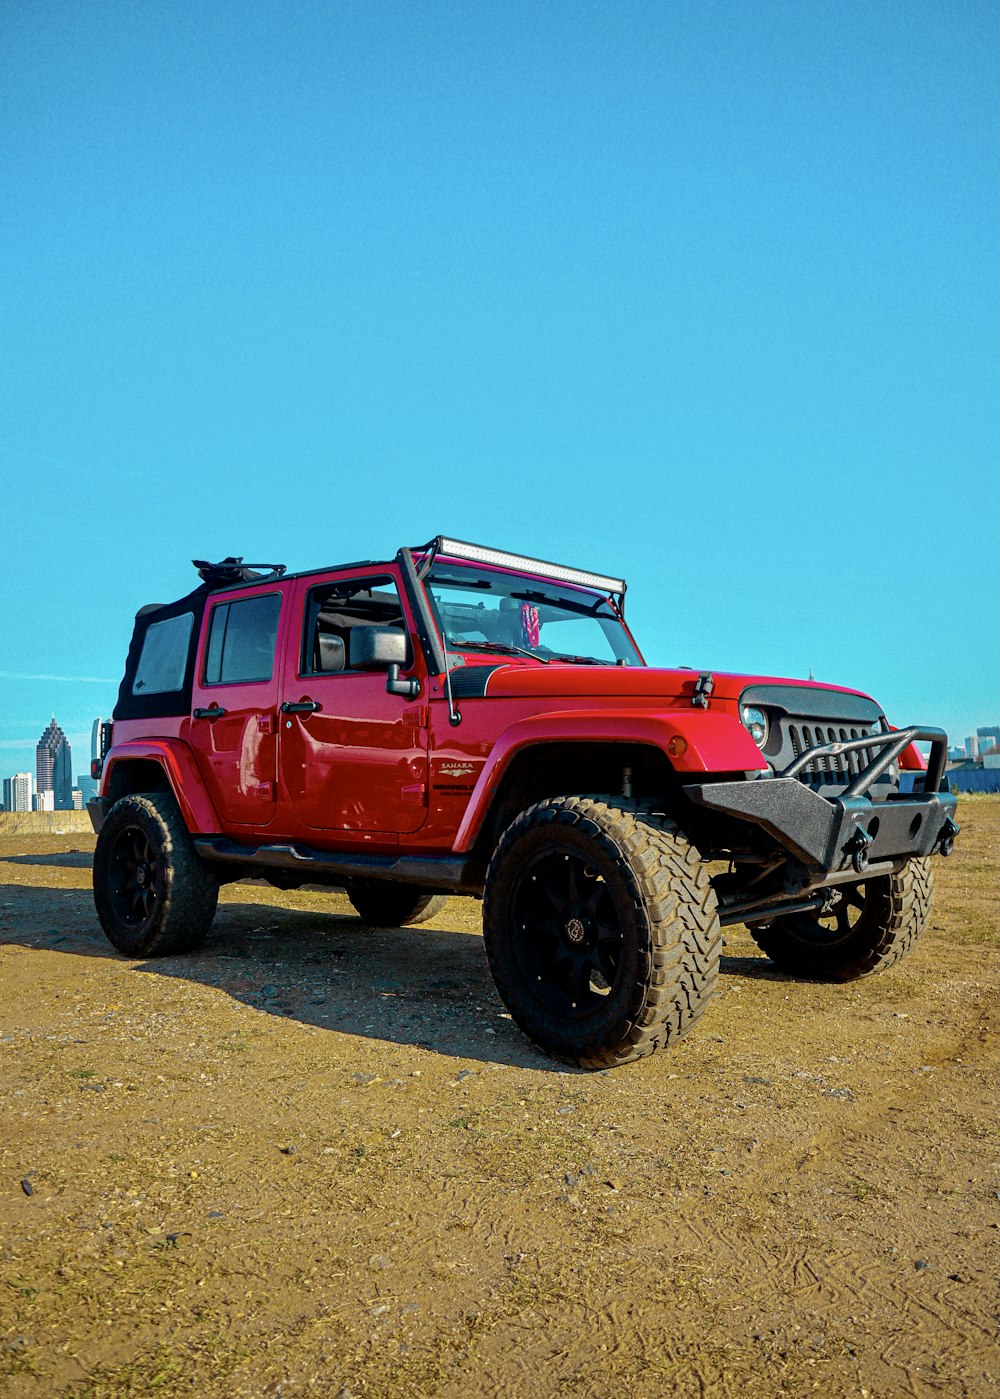 red and white jeep wrangler on brown sand during daytime photo – Free  Atlanta Image on Unsplash